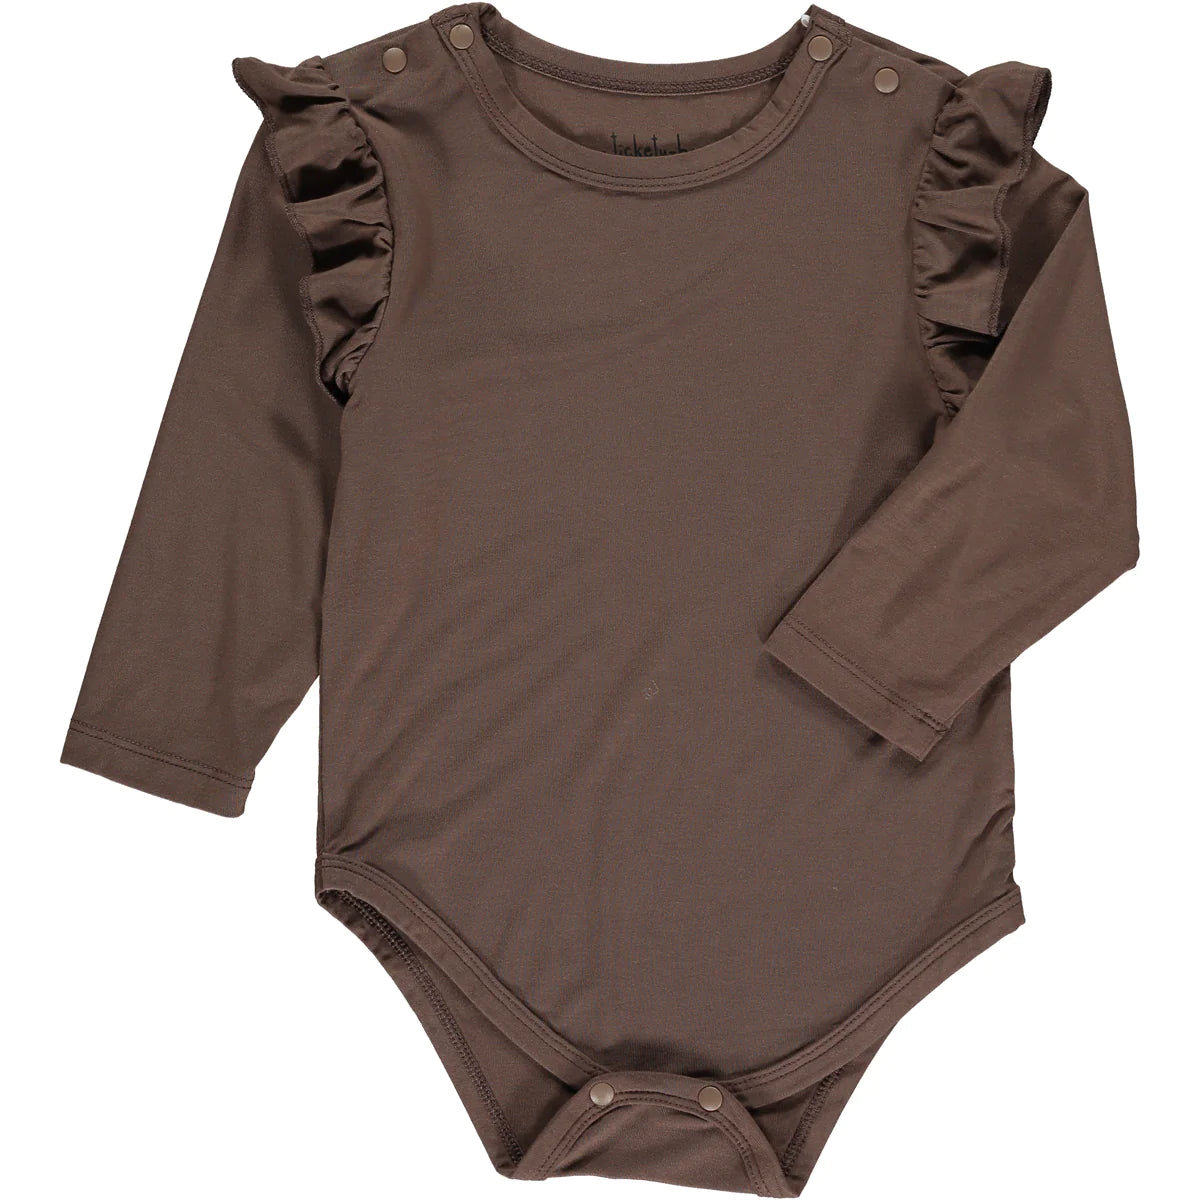 This Chocolate Frill Onesise is oh-so-soft and sweet. Features pretty ruffle frills at shoulder, and snaps at the neck and legs for easy changing. Pair with our Chocolate Ruffle Bamboo Pants!   95% bamboo viscose, 5% spandex. Machine wash cold. 